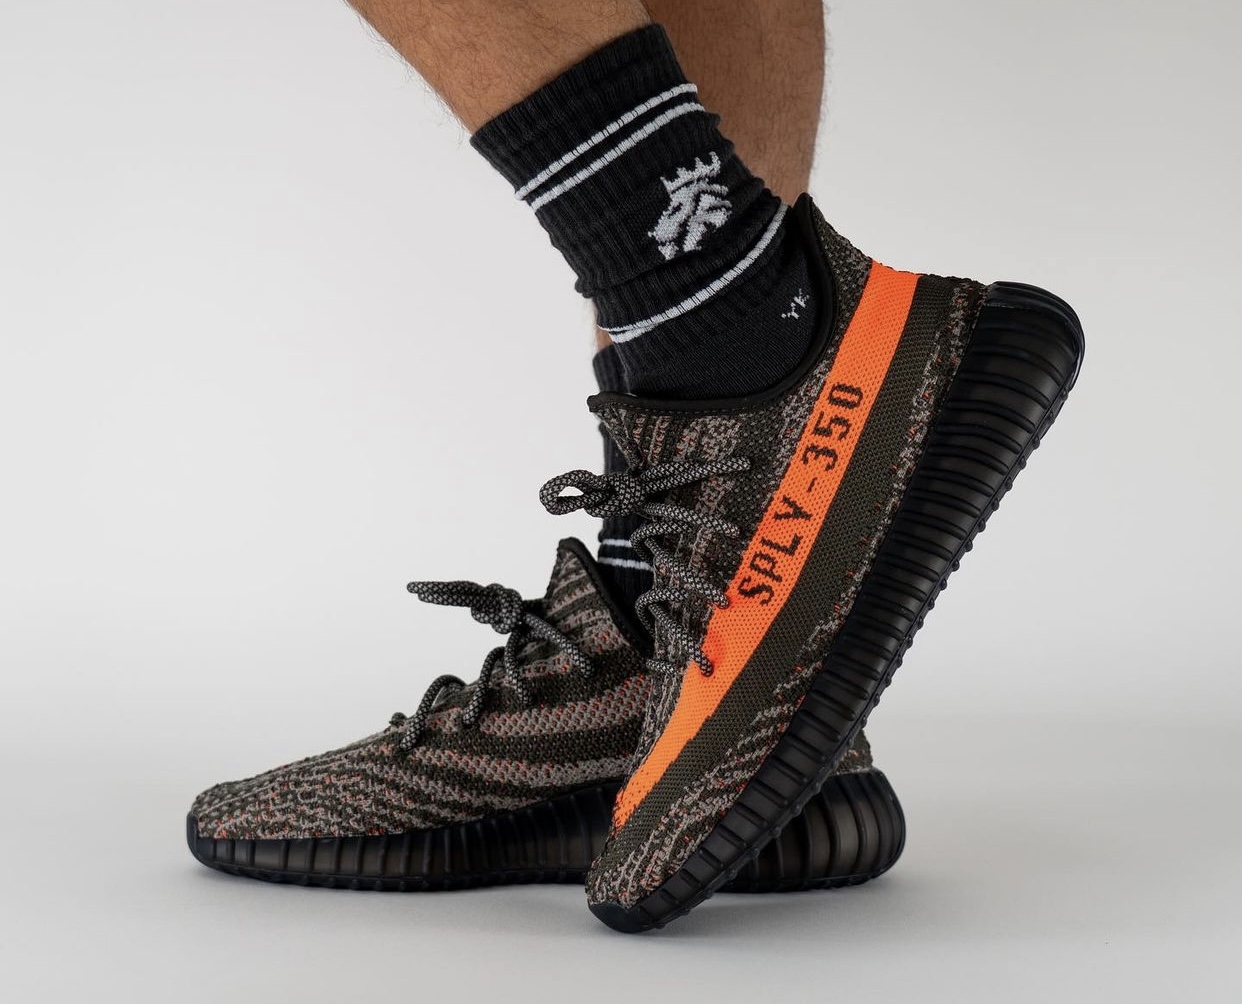 adidas Yeezy Boost 350 V2 Carbon Beluga Release Date |